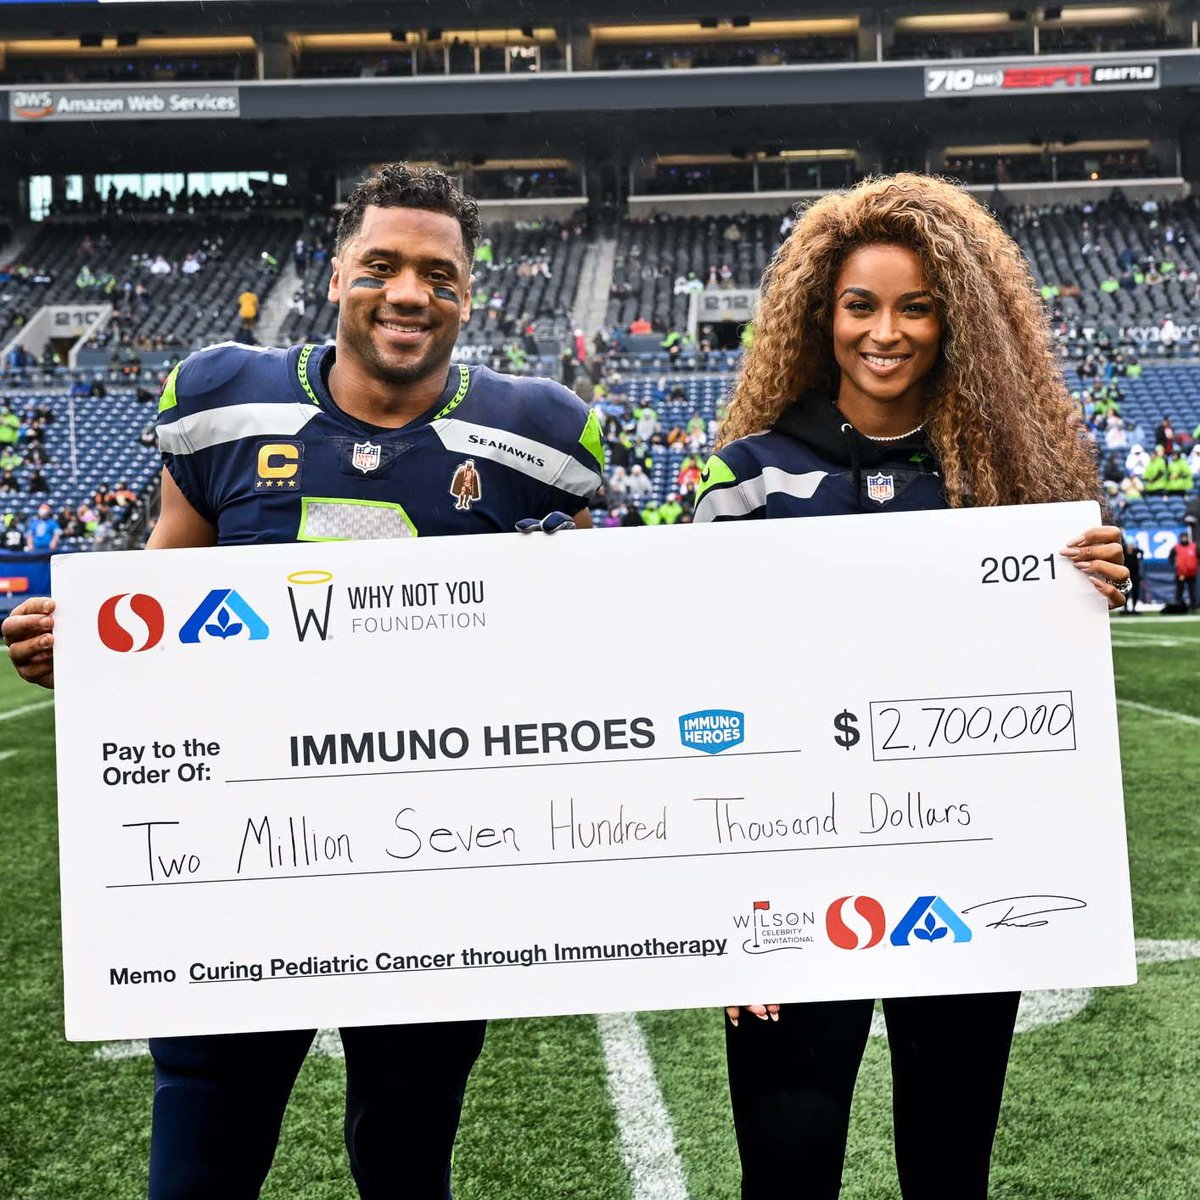 .@DangeRussWilson and @Ciara presented this $2.7 million check to the @seattlechildren #ImmunoHeroes campaign earlier today.

It’s a joy to be a part of this campaign every year✨ Thank you to all @Safeway customers and employees who helped make this happen! #WhyNotYou #WhyNotUs